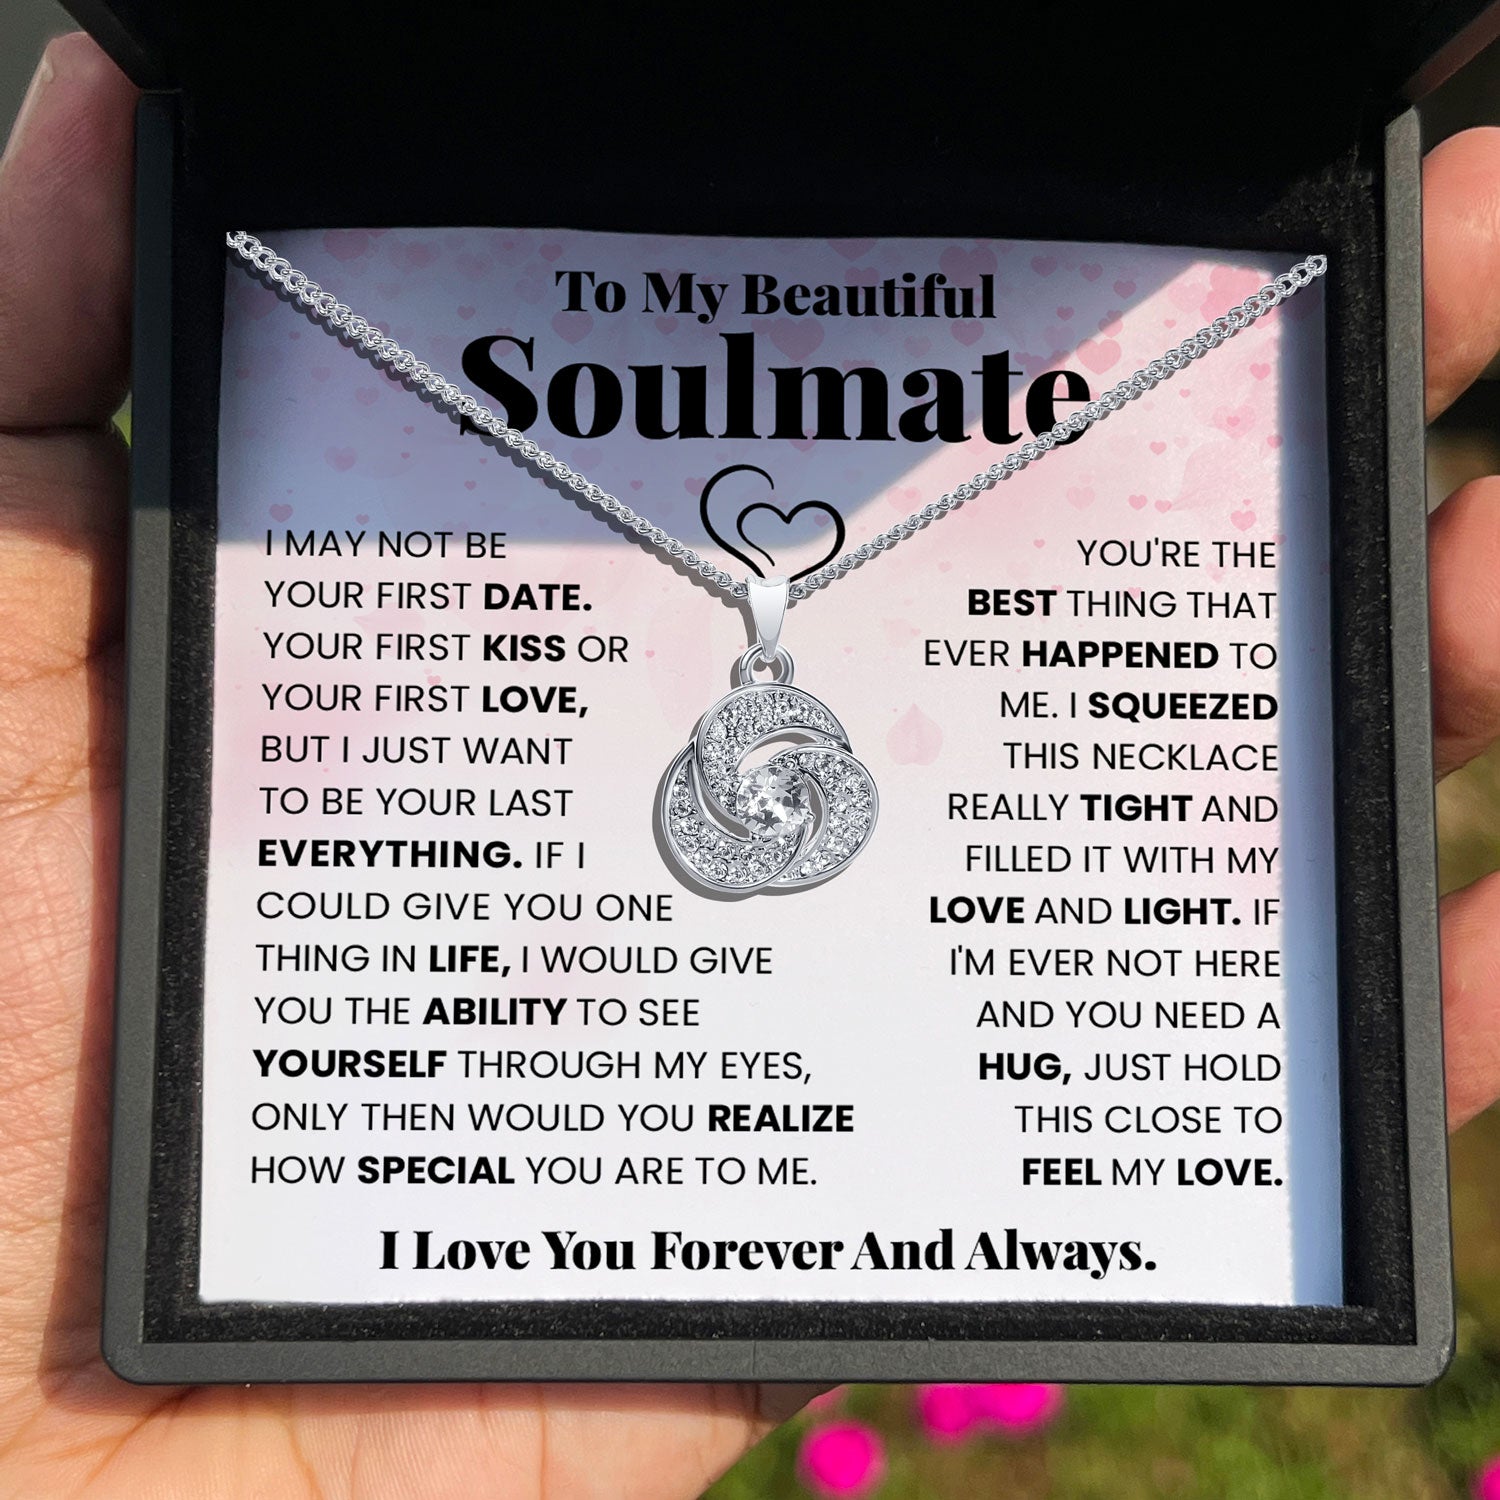 To My Beautiful Soulmate - Just Hold This Close to Feel My Love - Tryndi Love Knot Necklace